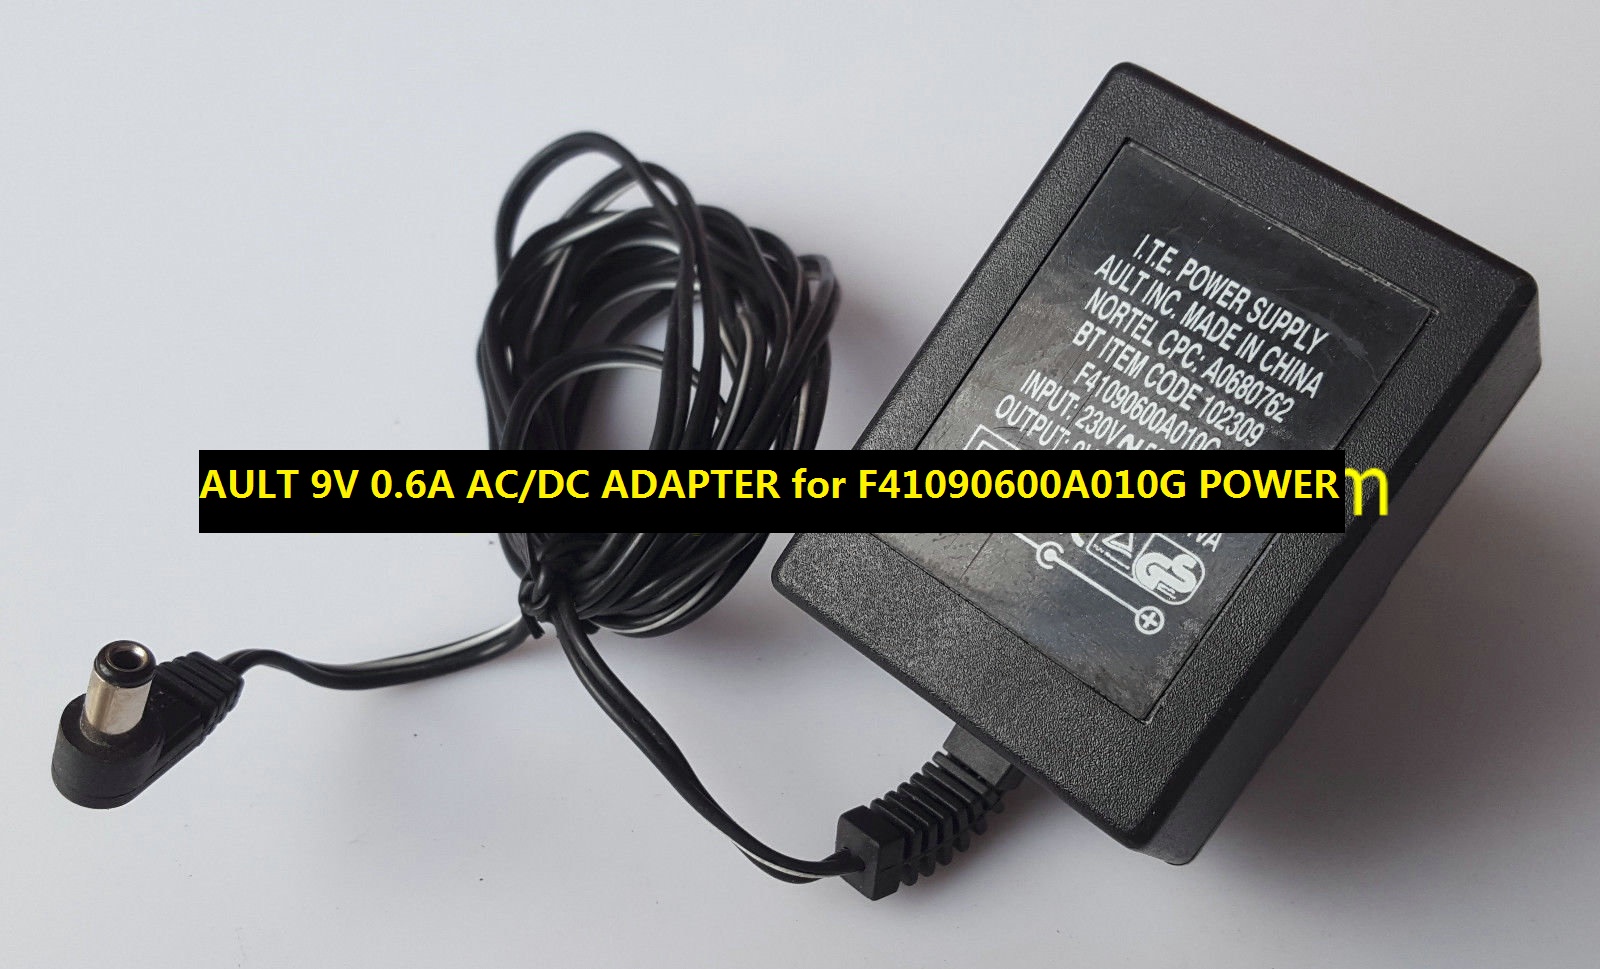 *100% Brand NEW* AULT 9V 0.6A AC/DC ADAPTER for F41090600A010G POWER SUPPLY